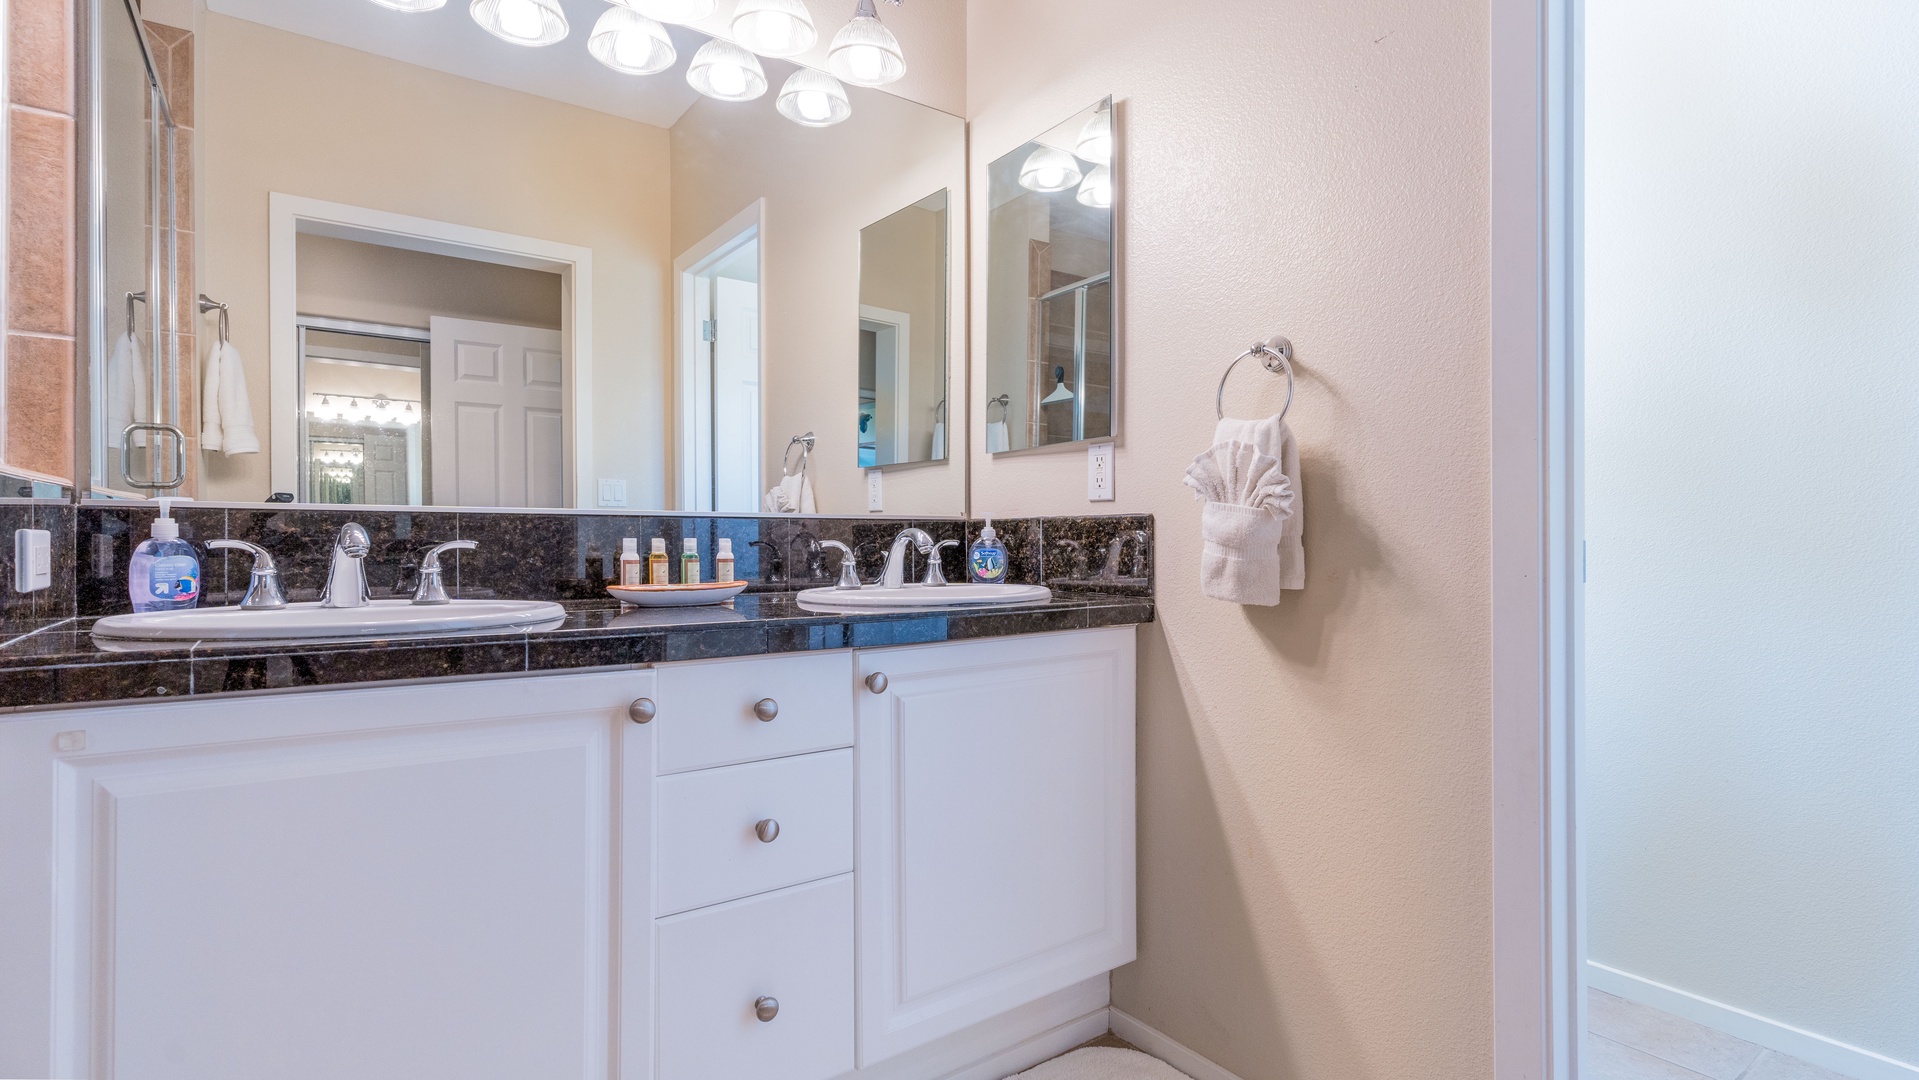 Kapolei Vacation Rentals, Coconut Plantation 1194-3 - The primary guest bathroom with ample lighting.